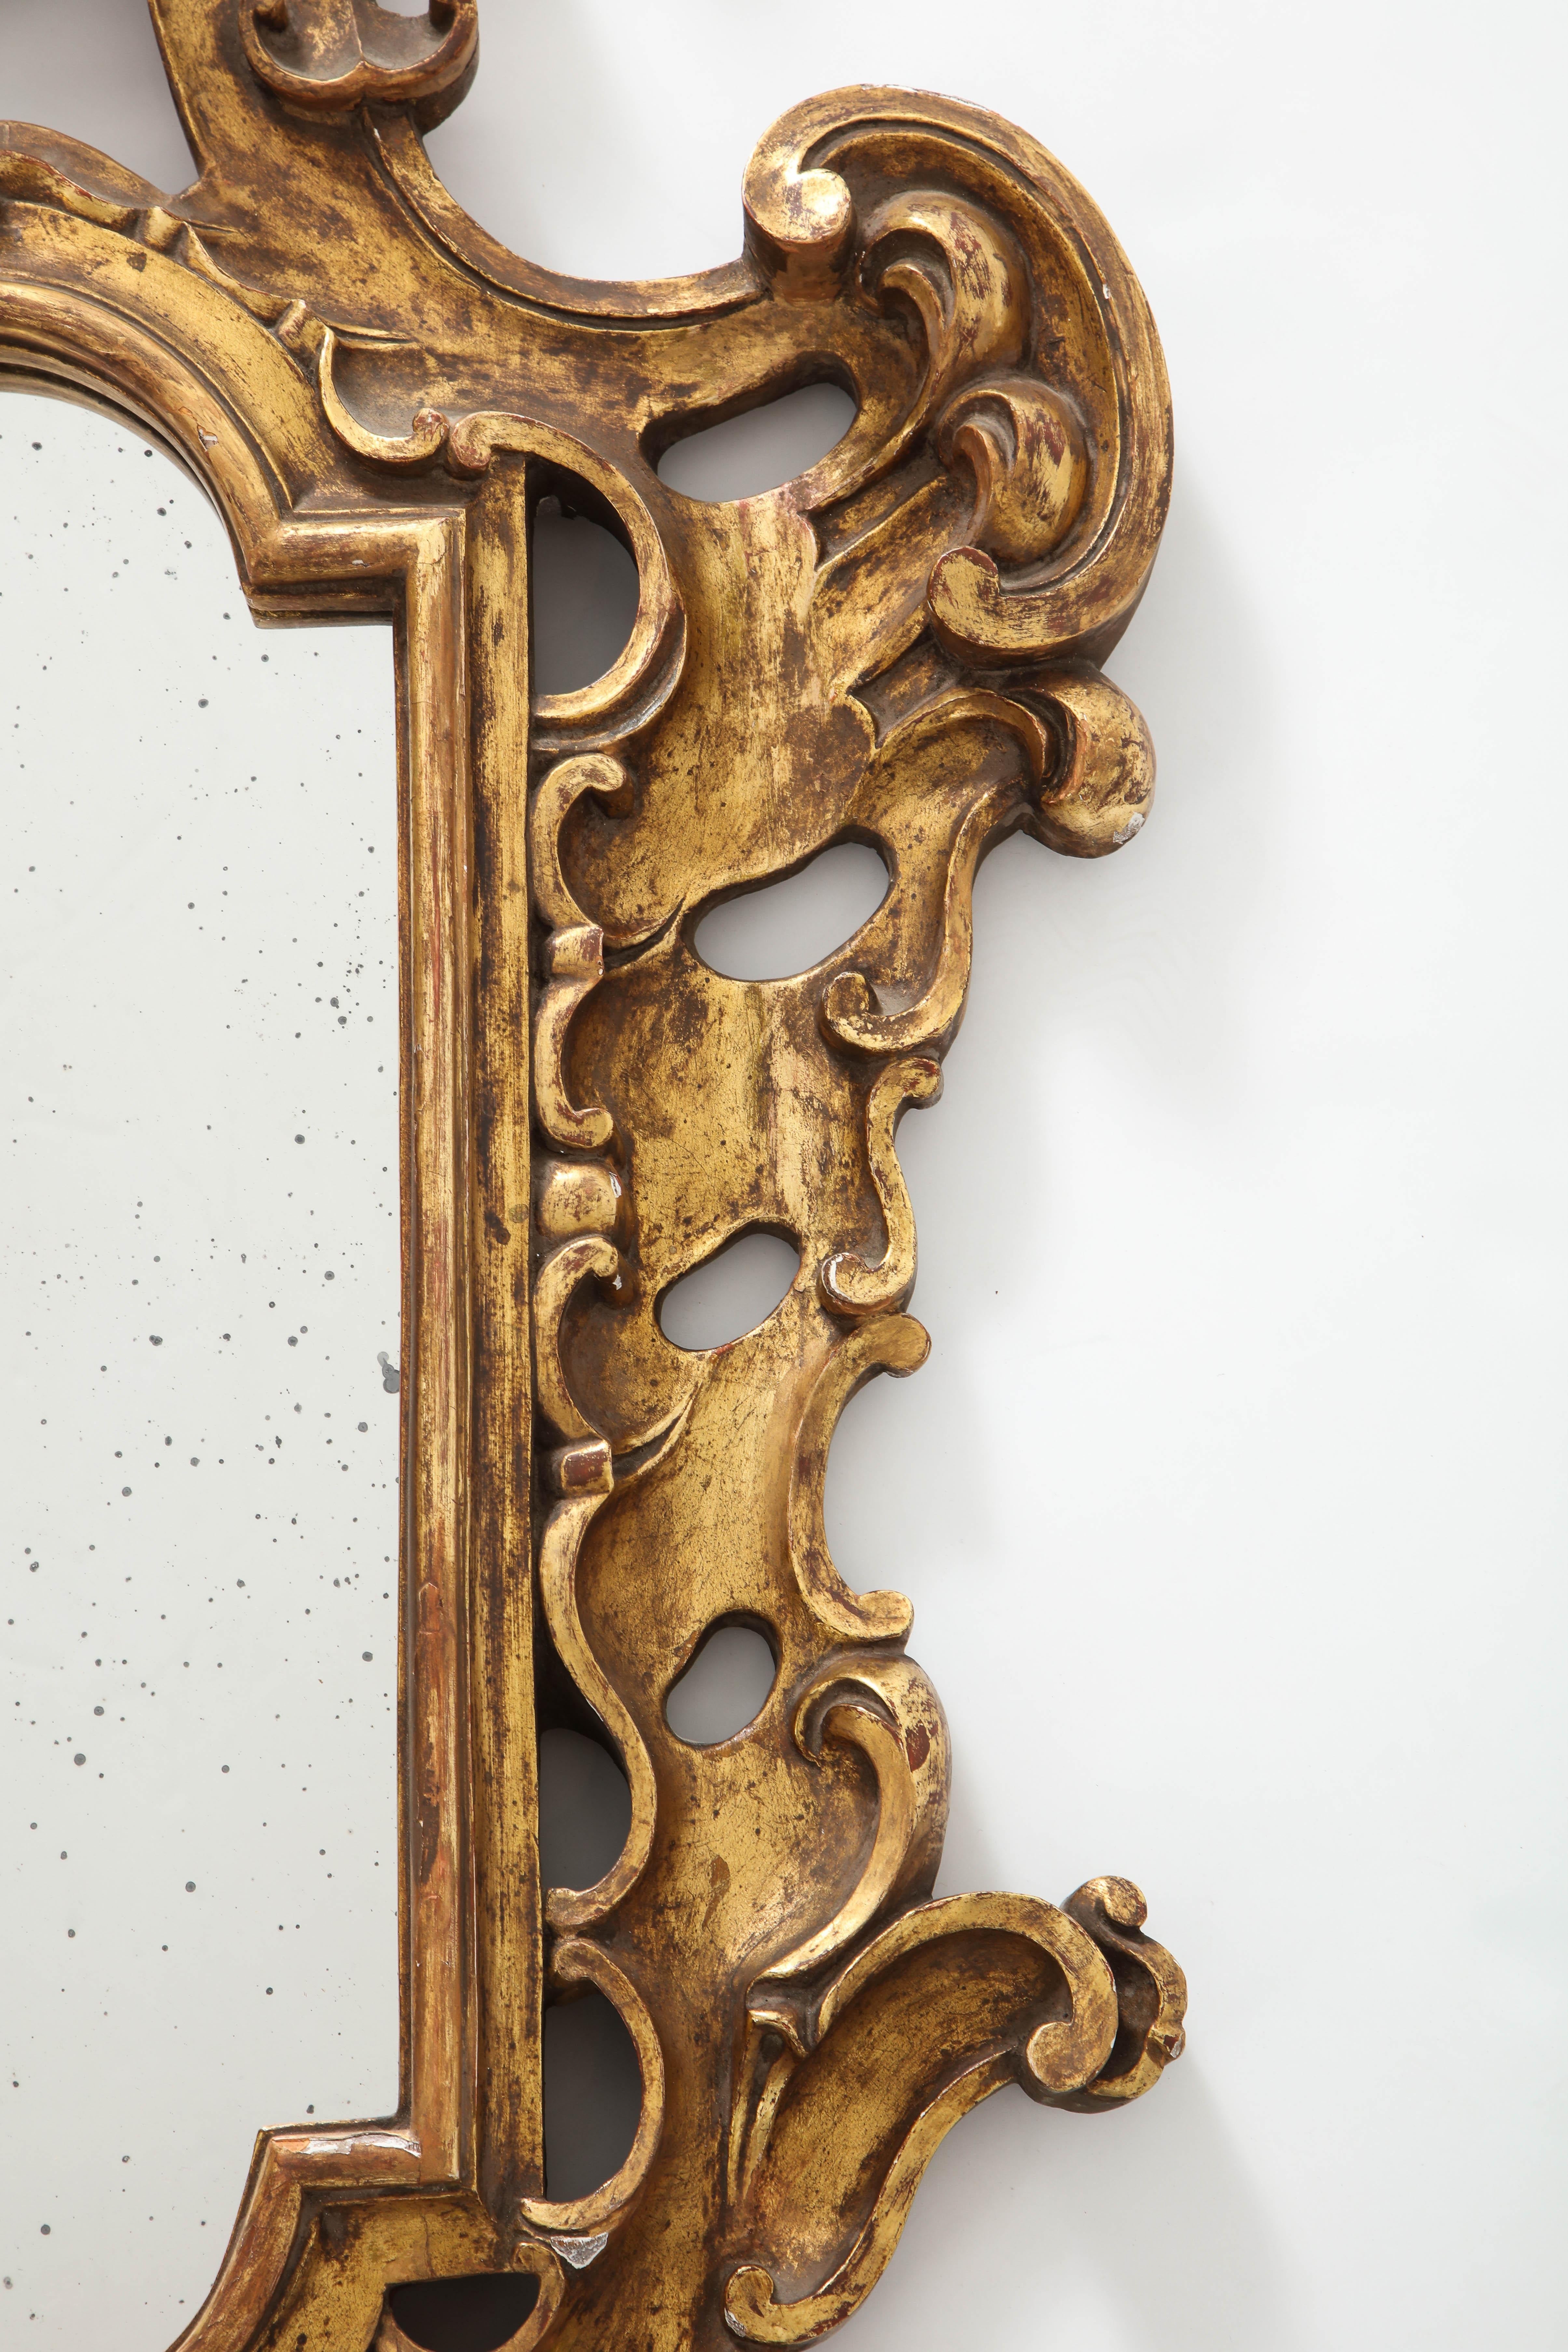 Gilt carved wood Baroque Revival style mirror.